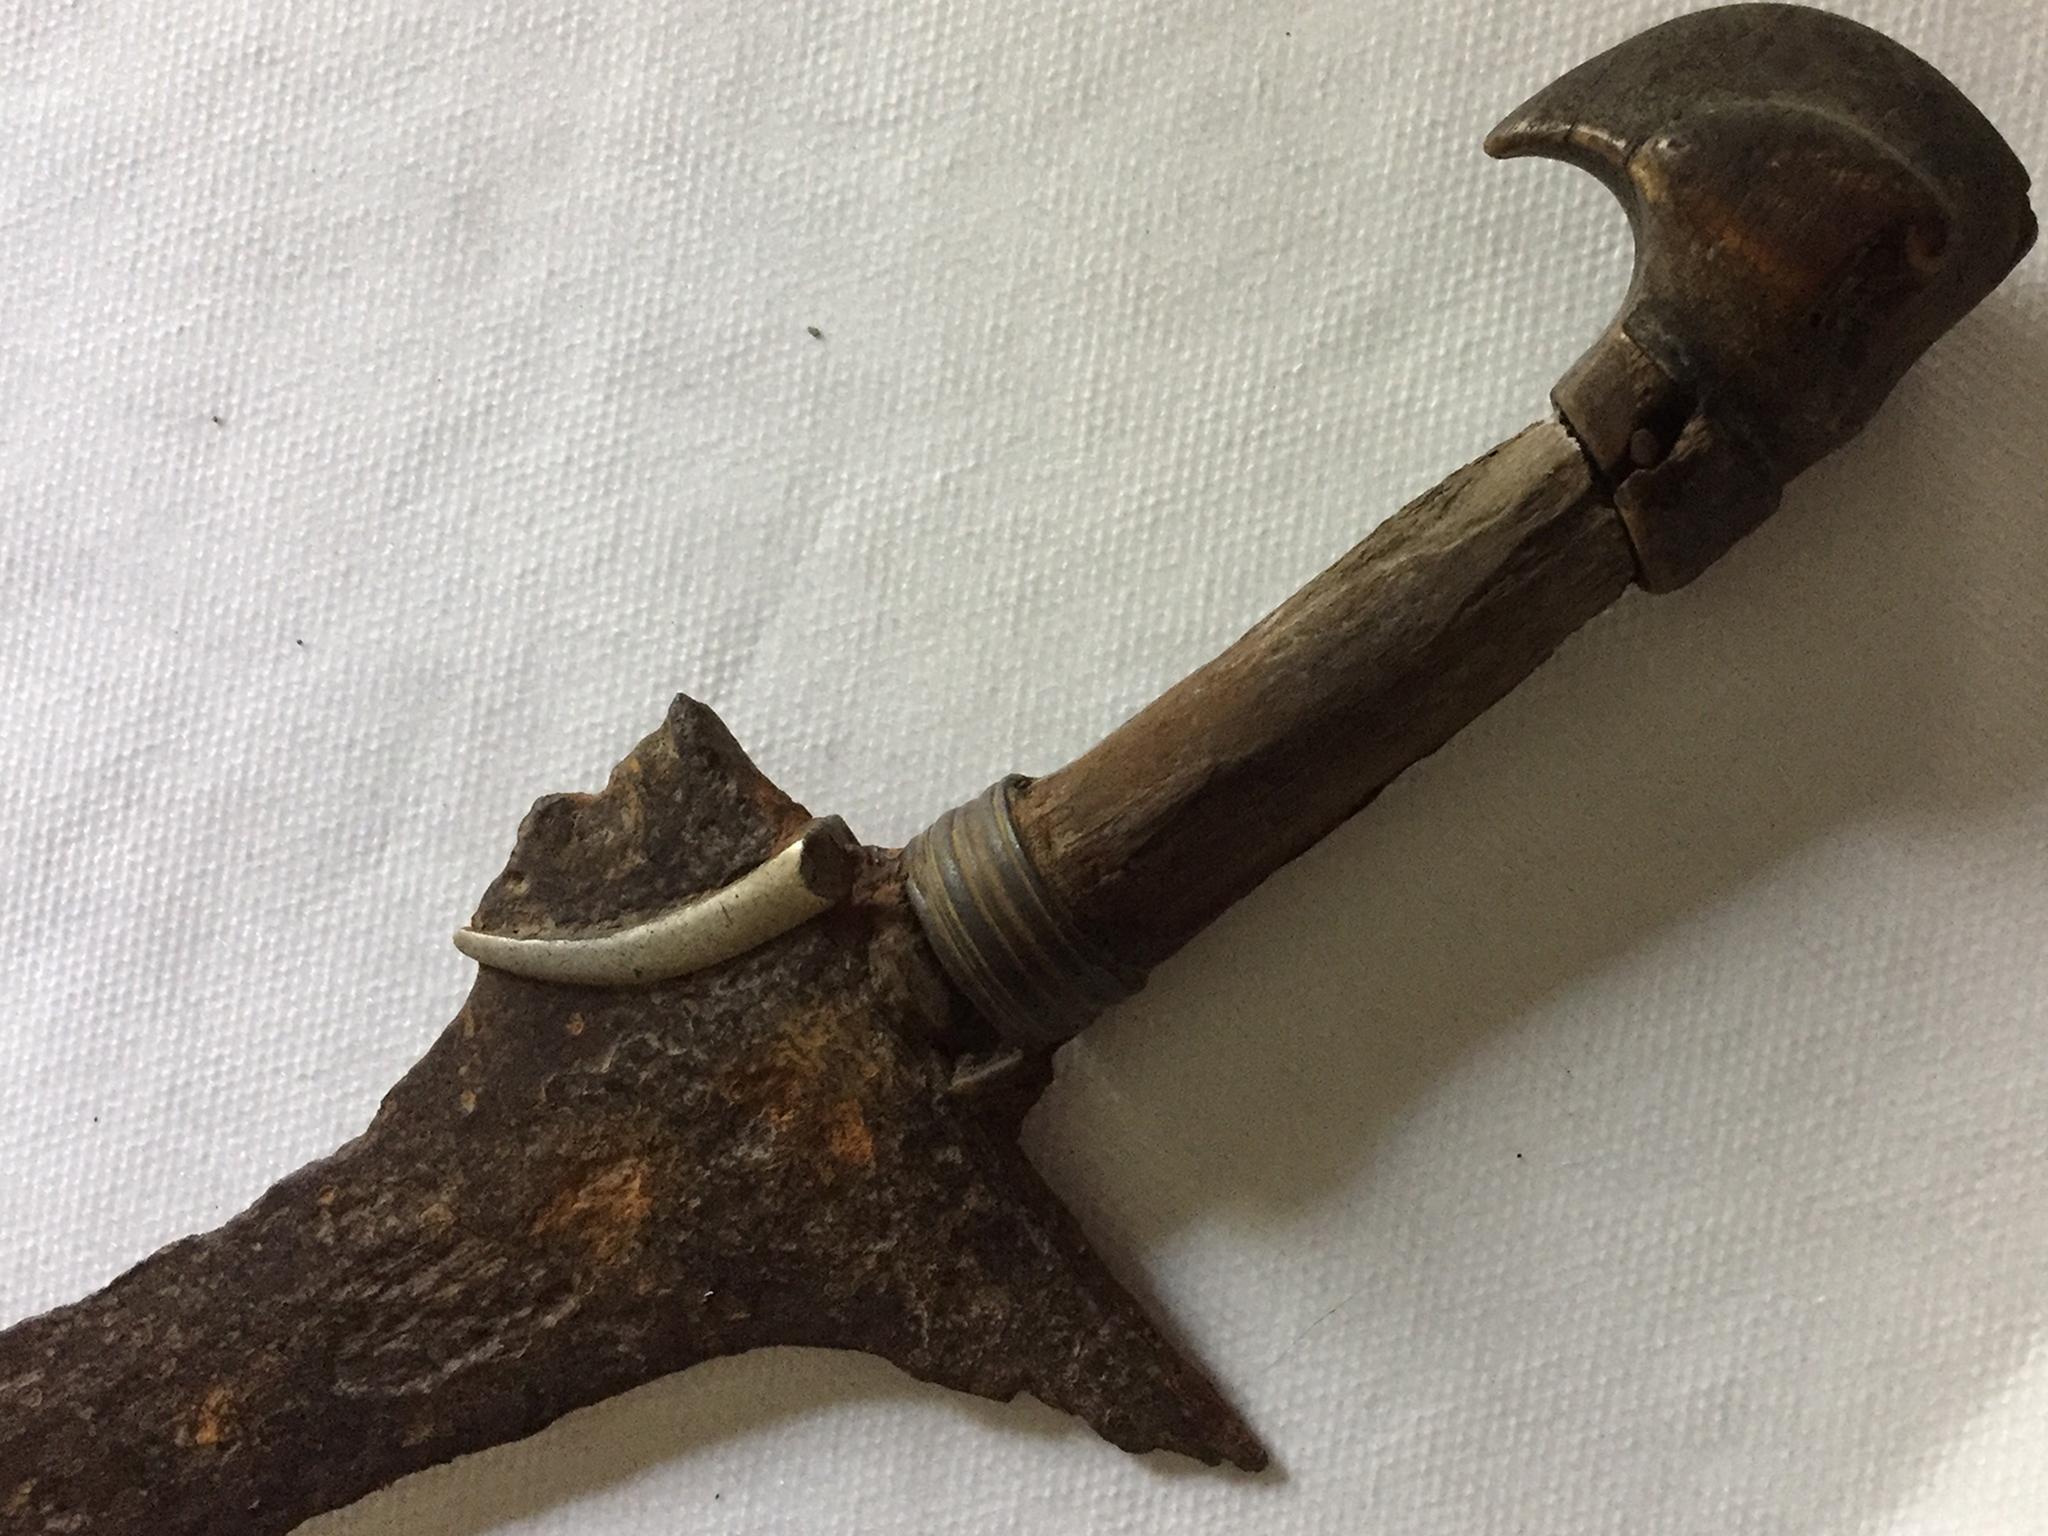 Go fish: The centuries-old weapon was found in good condition on the River Towy